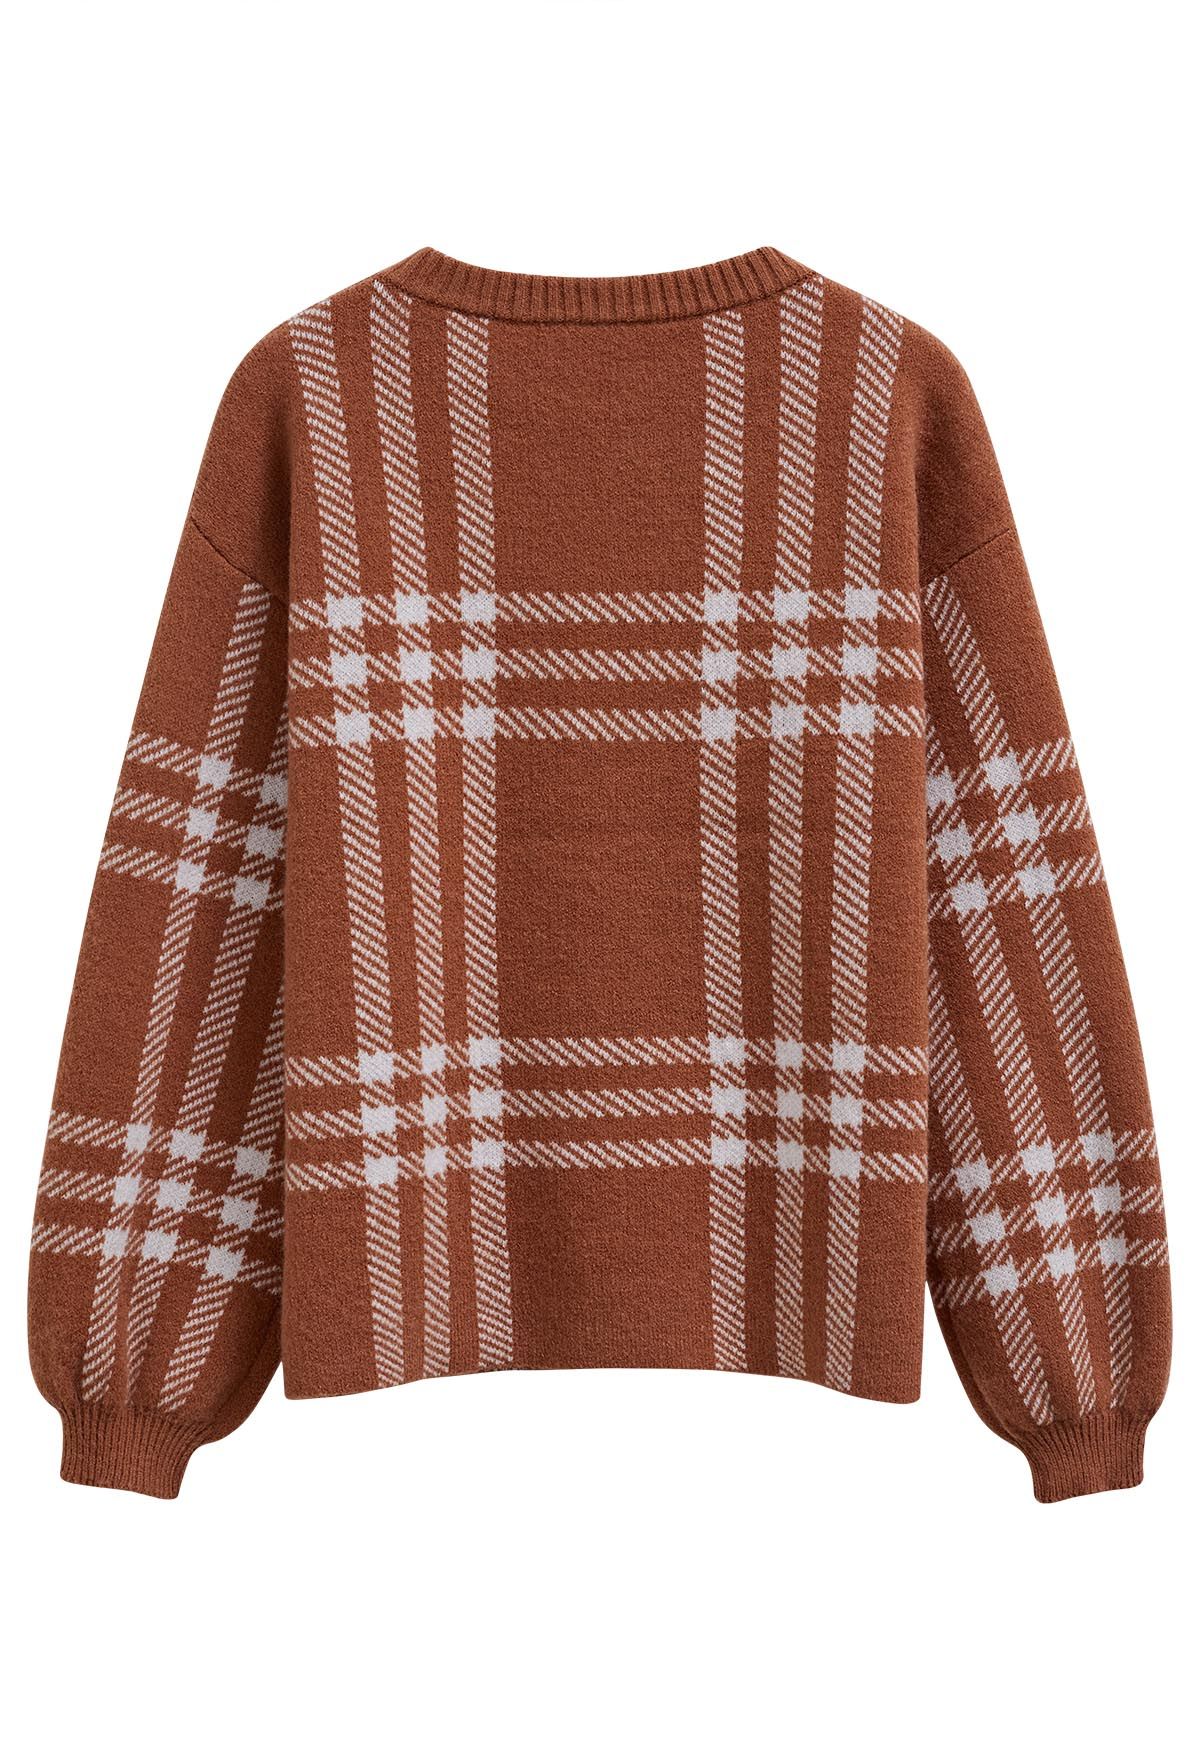 Classic Plaid Round Neck Knit Sweater in Caramel - Retro, Indie and ...